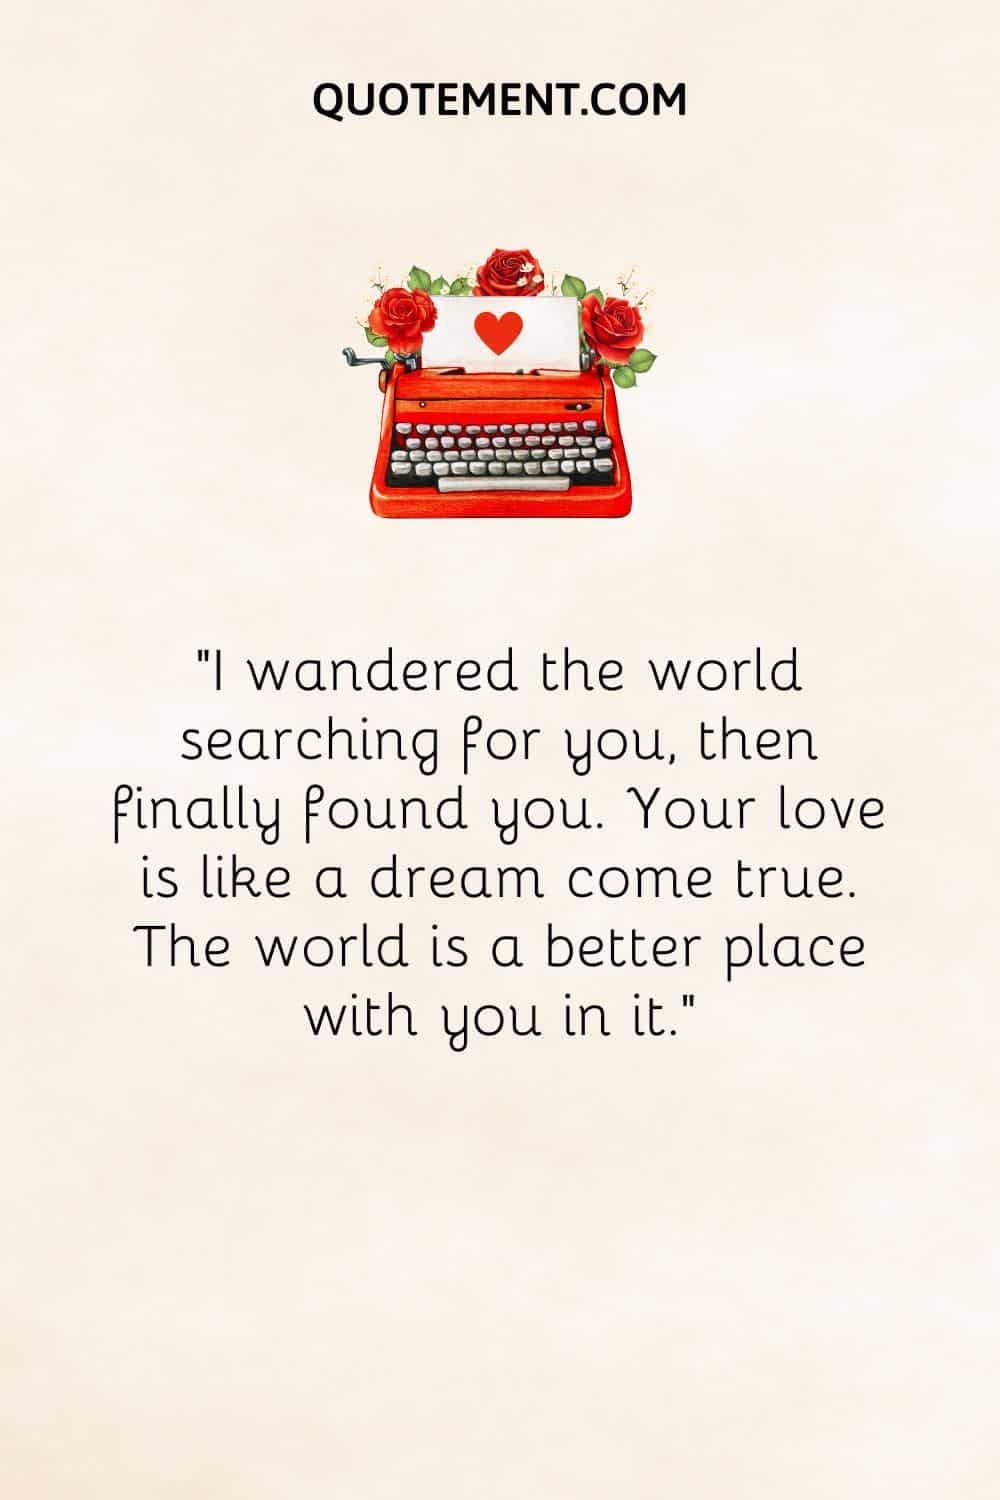 typing machine with roses image representing romantic letter for him